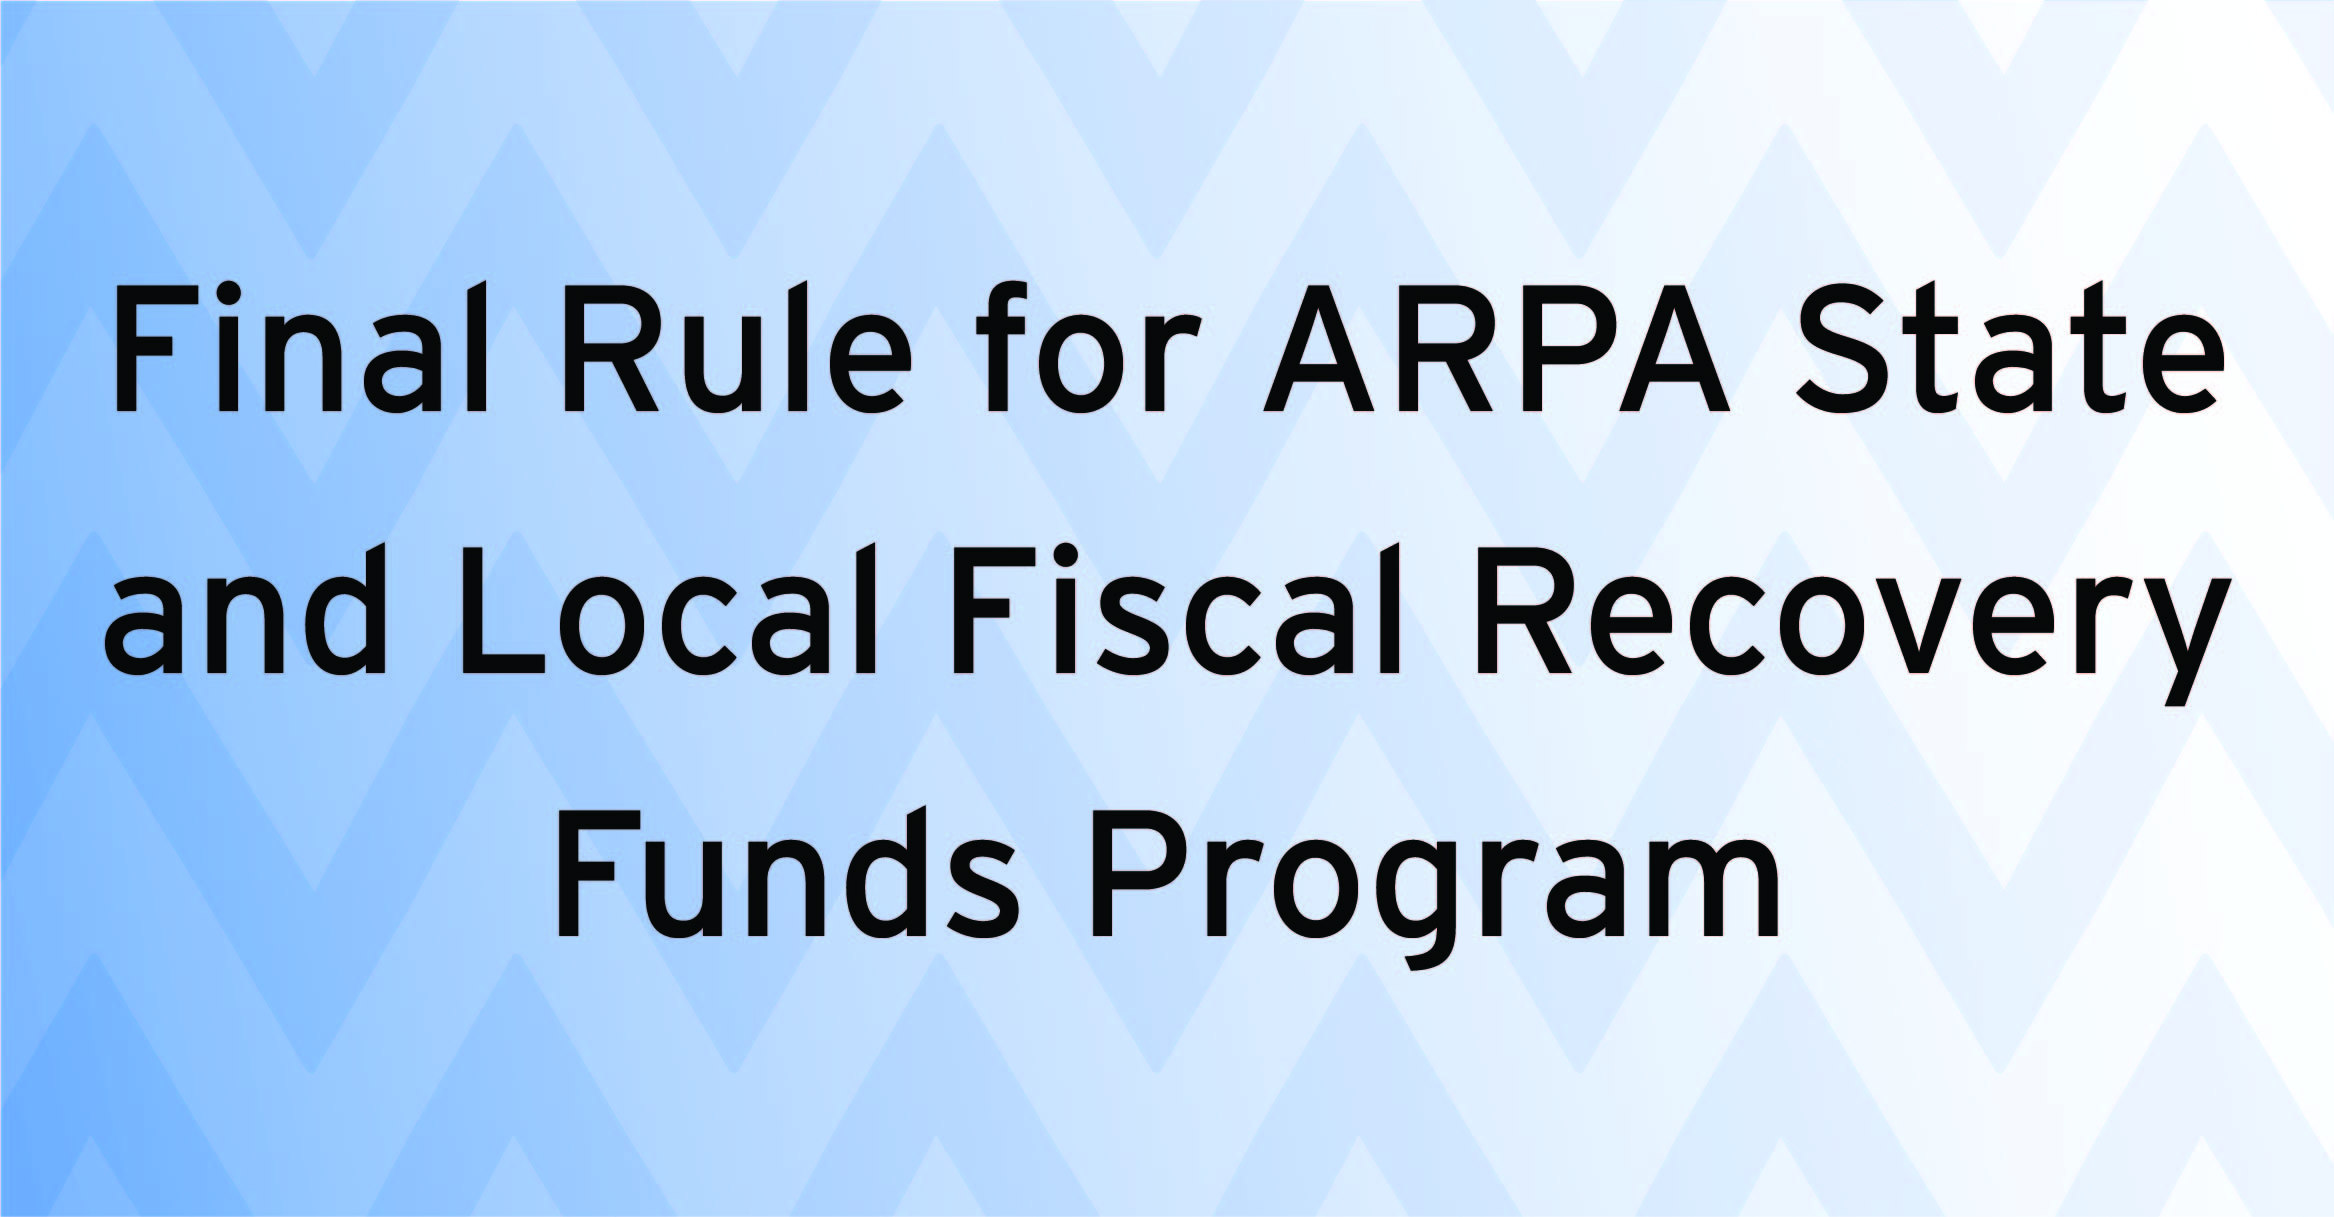 Final Rule for ARPA